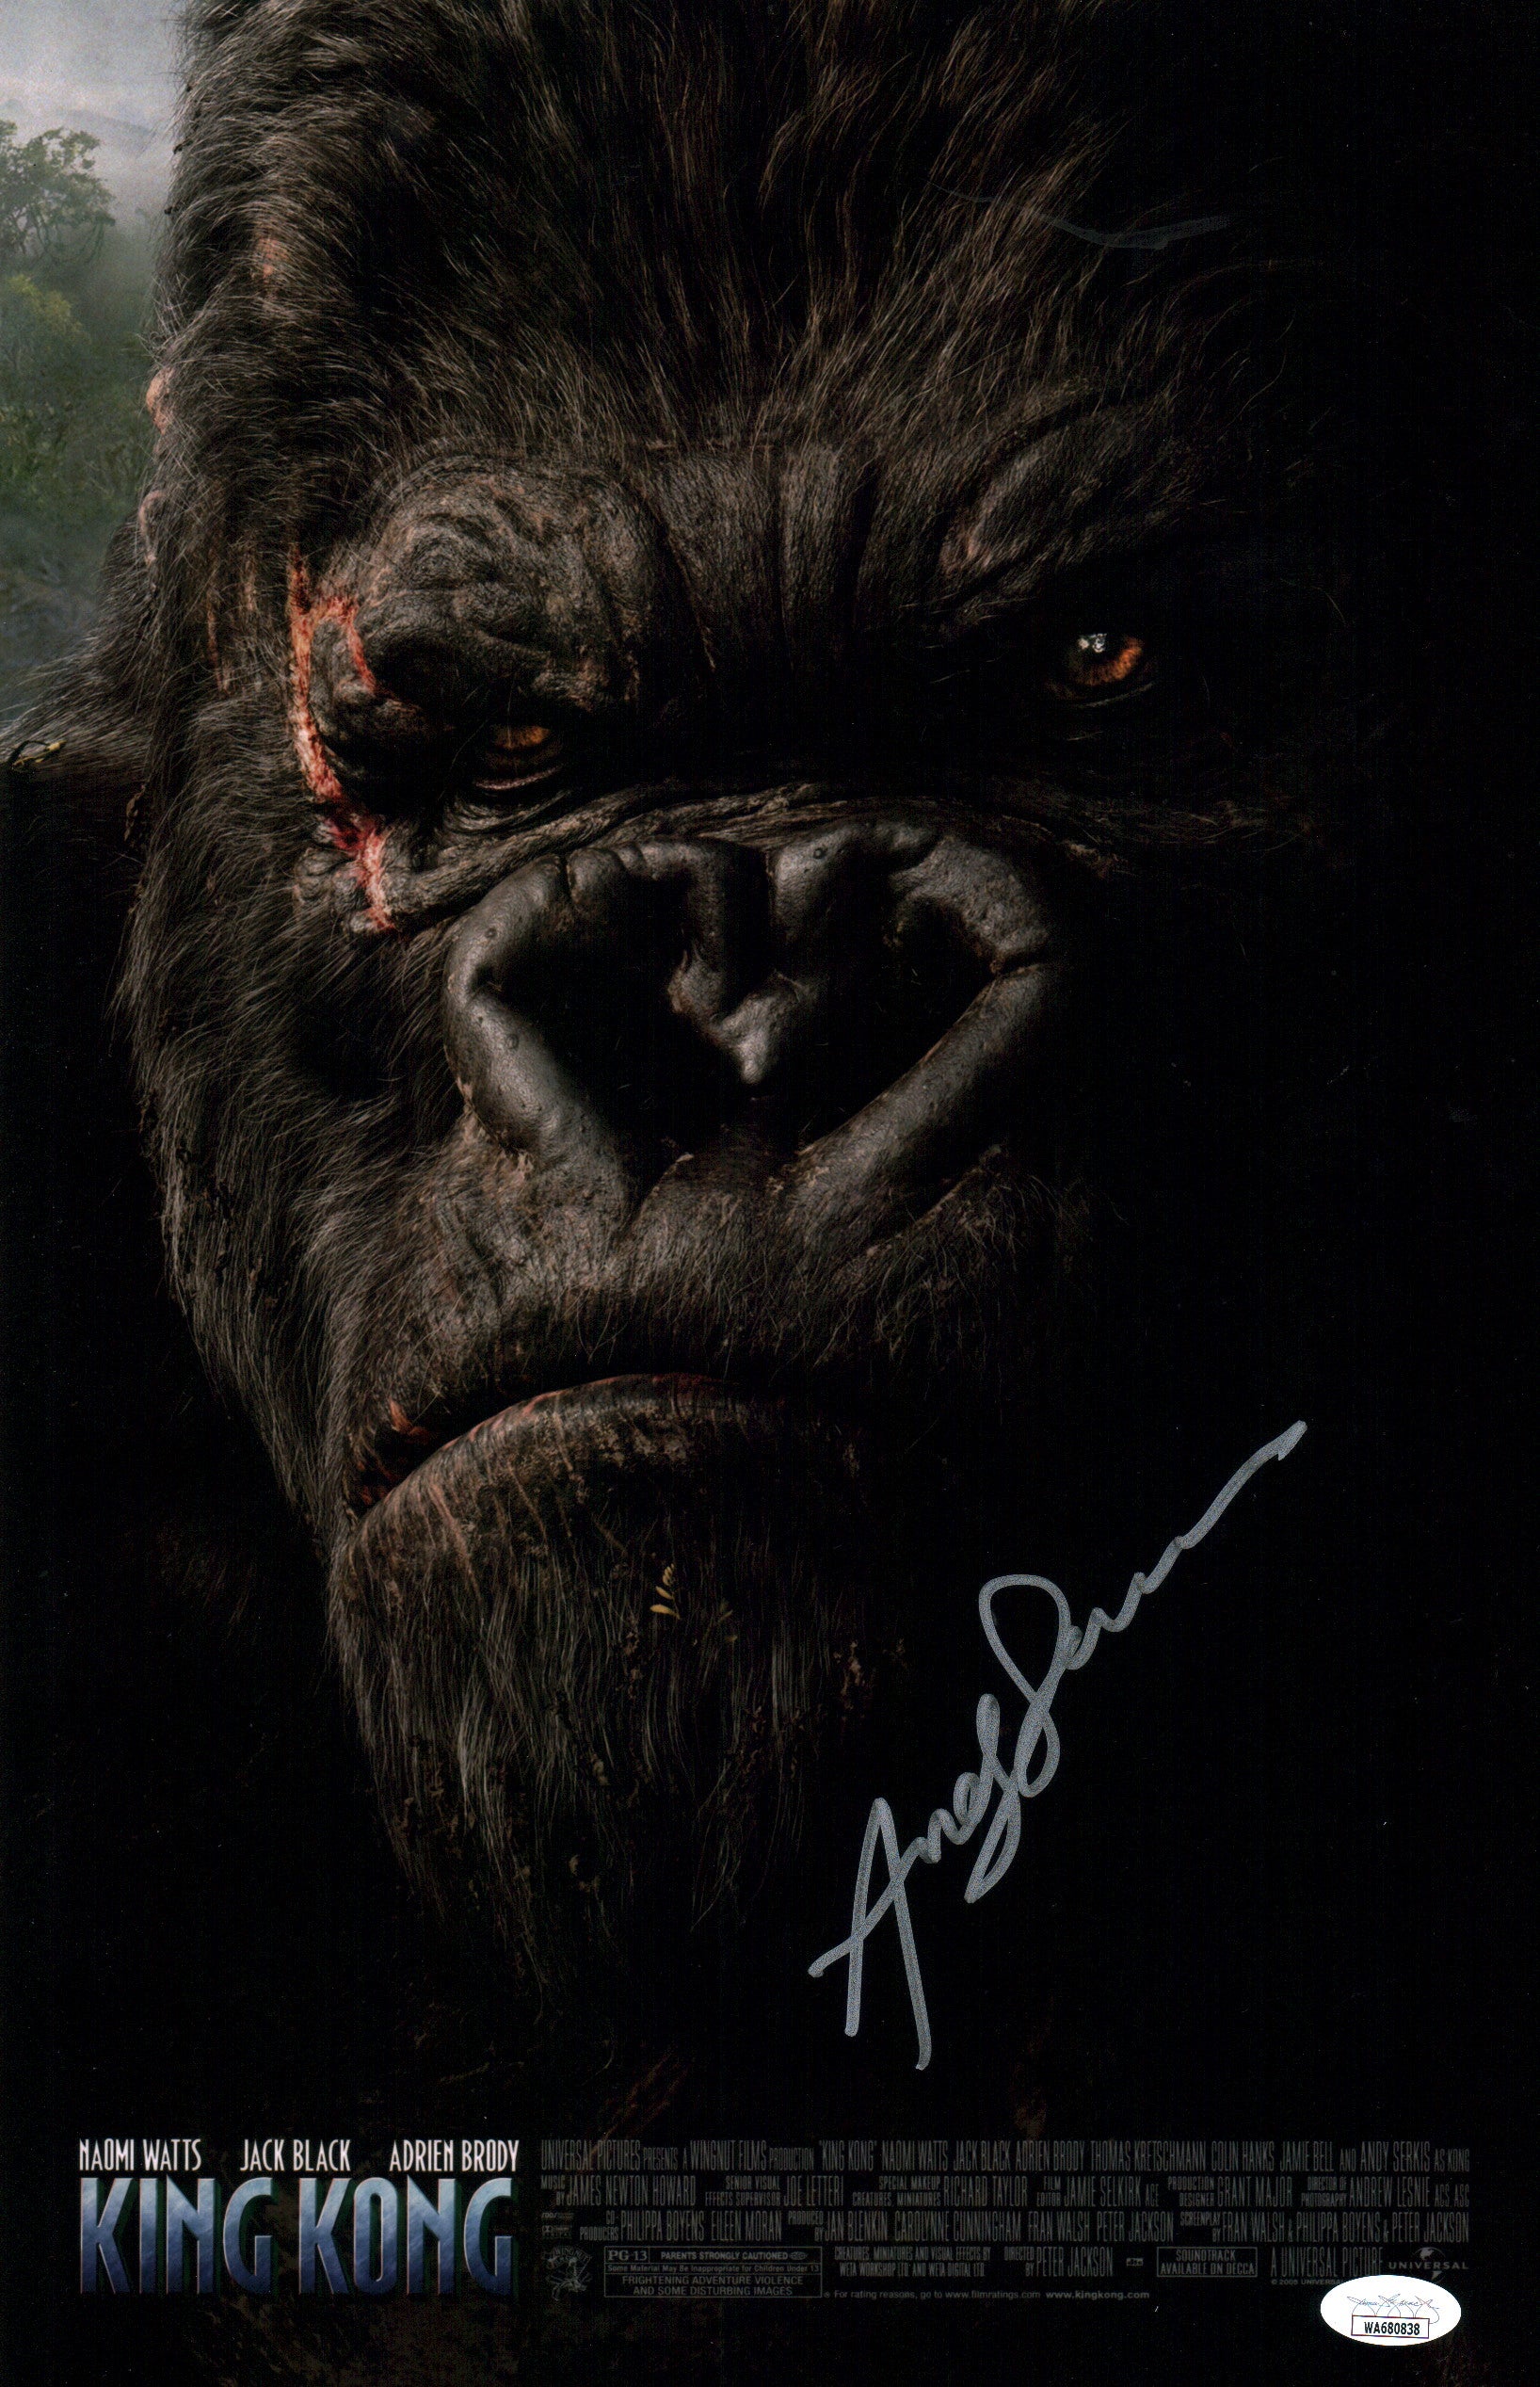 Andy Serkis King Kong 11x17 Signed Photo Poster JSA COA Certified Autograph